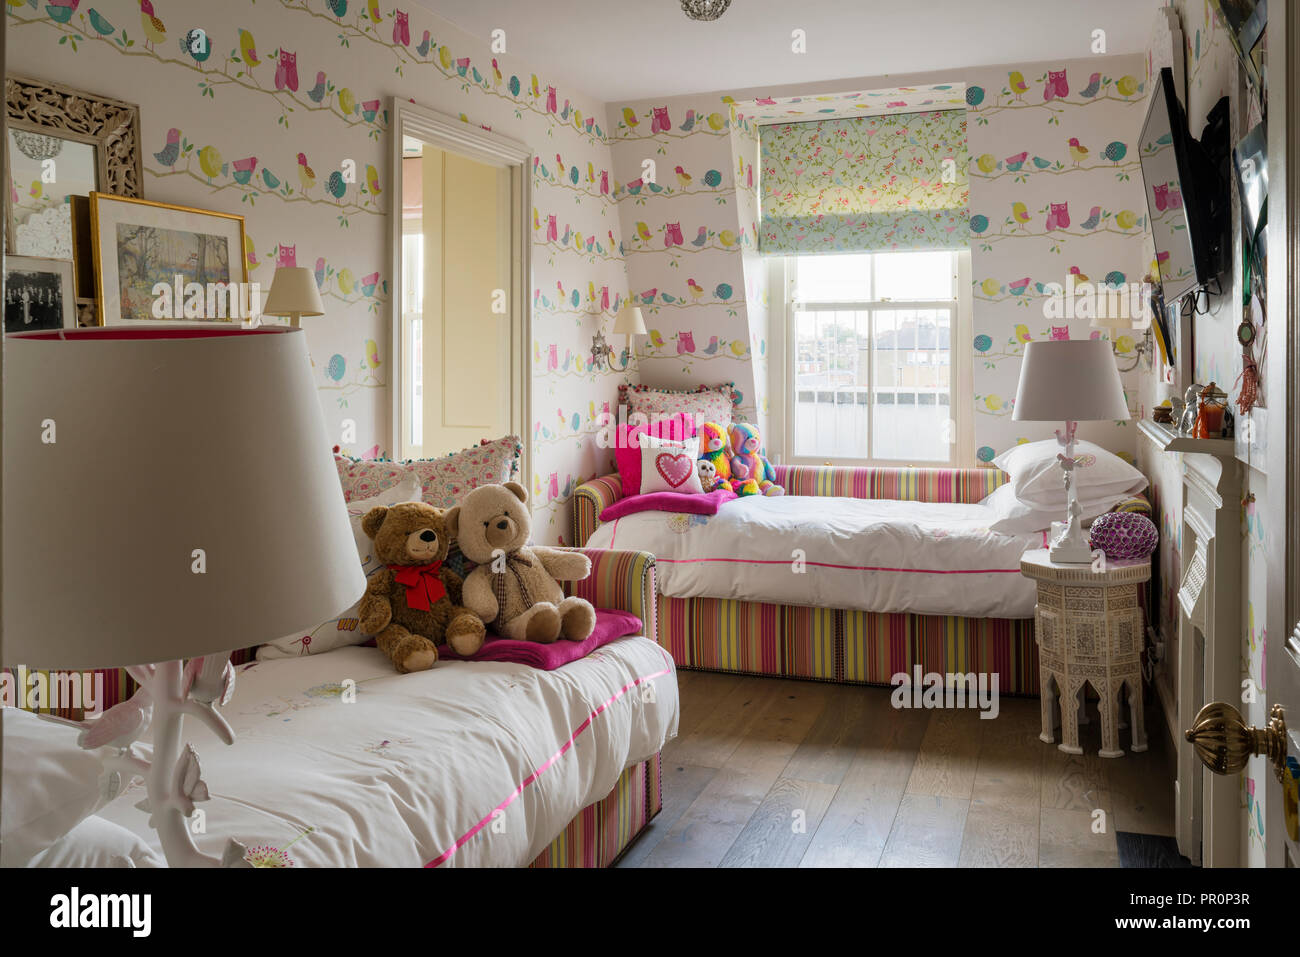 Striped daybeds with bird patterned wallpaper in girls room Stock Photo